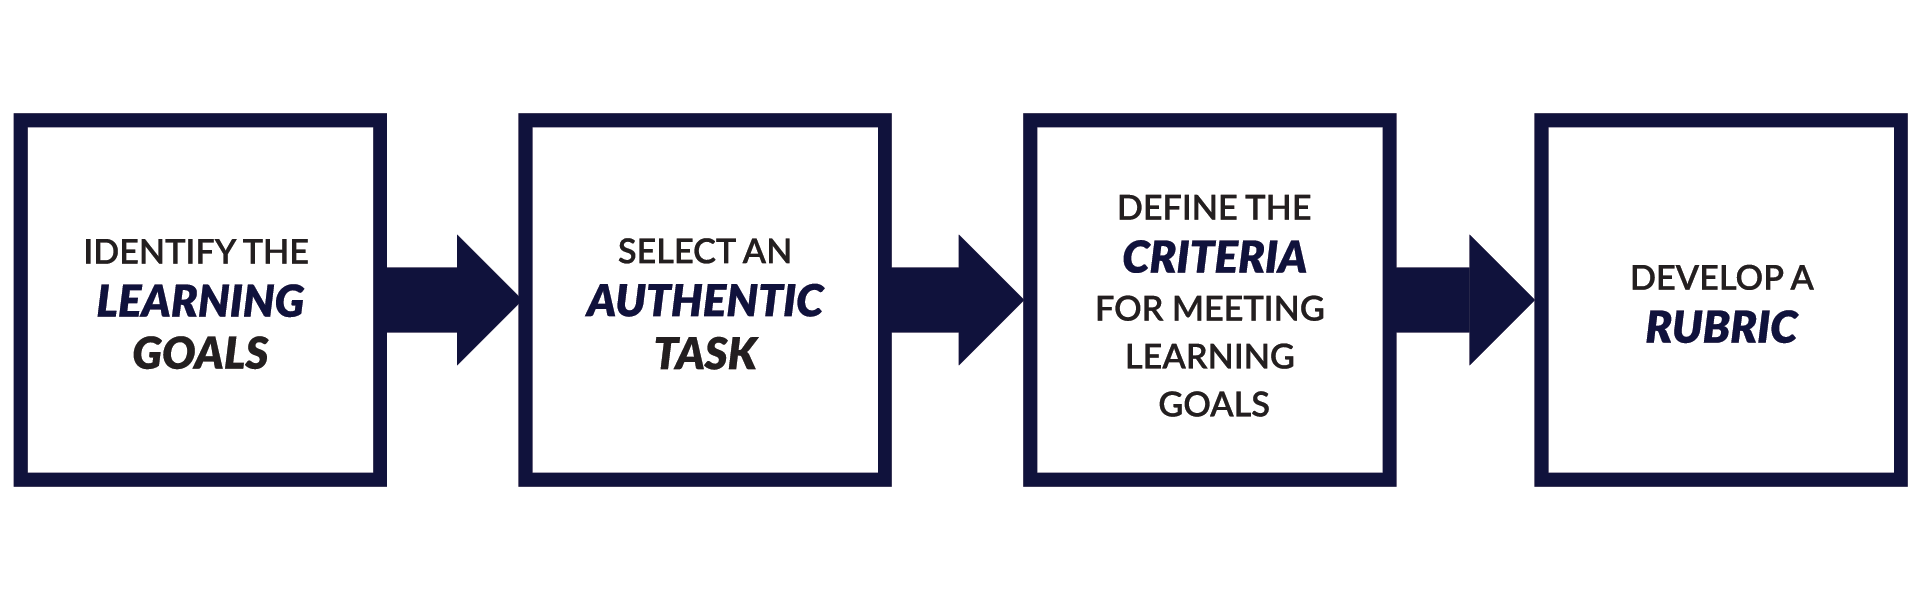 four steps to designing authentic assessments; described in caption